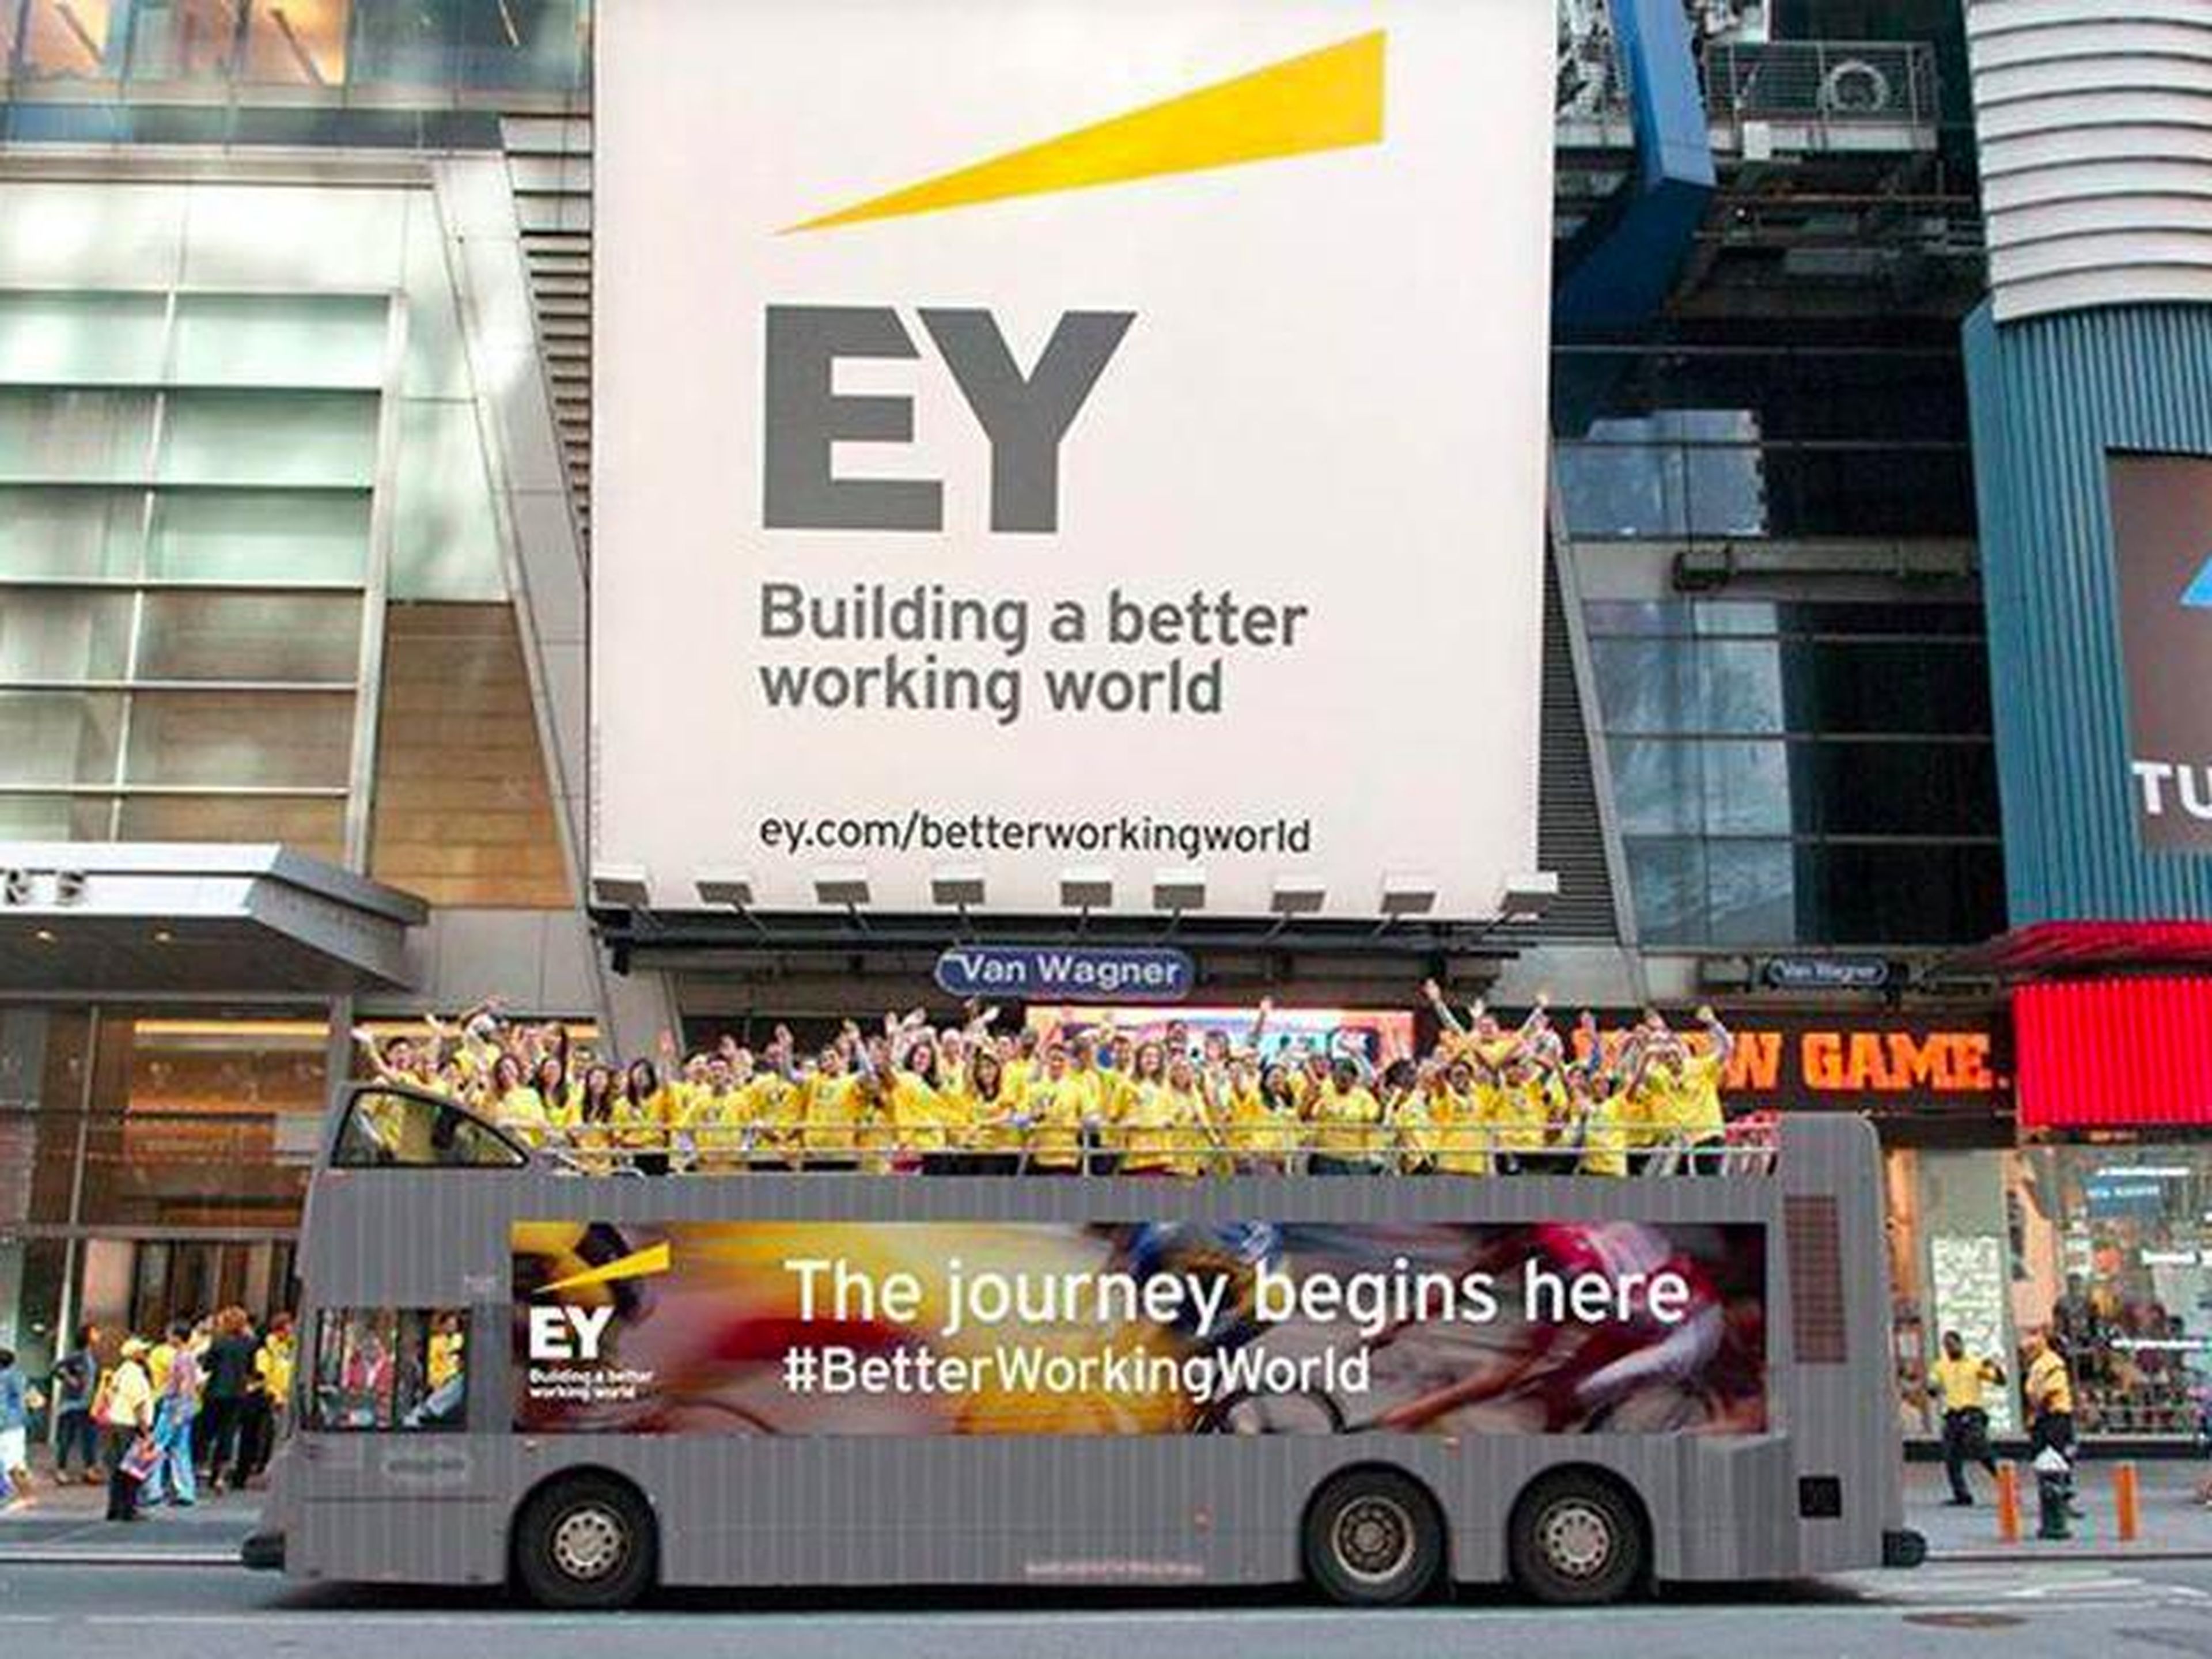 2. Ernst & Young